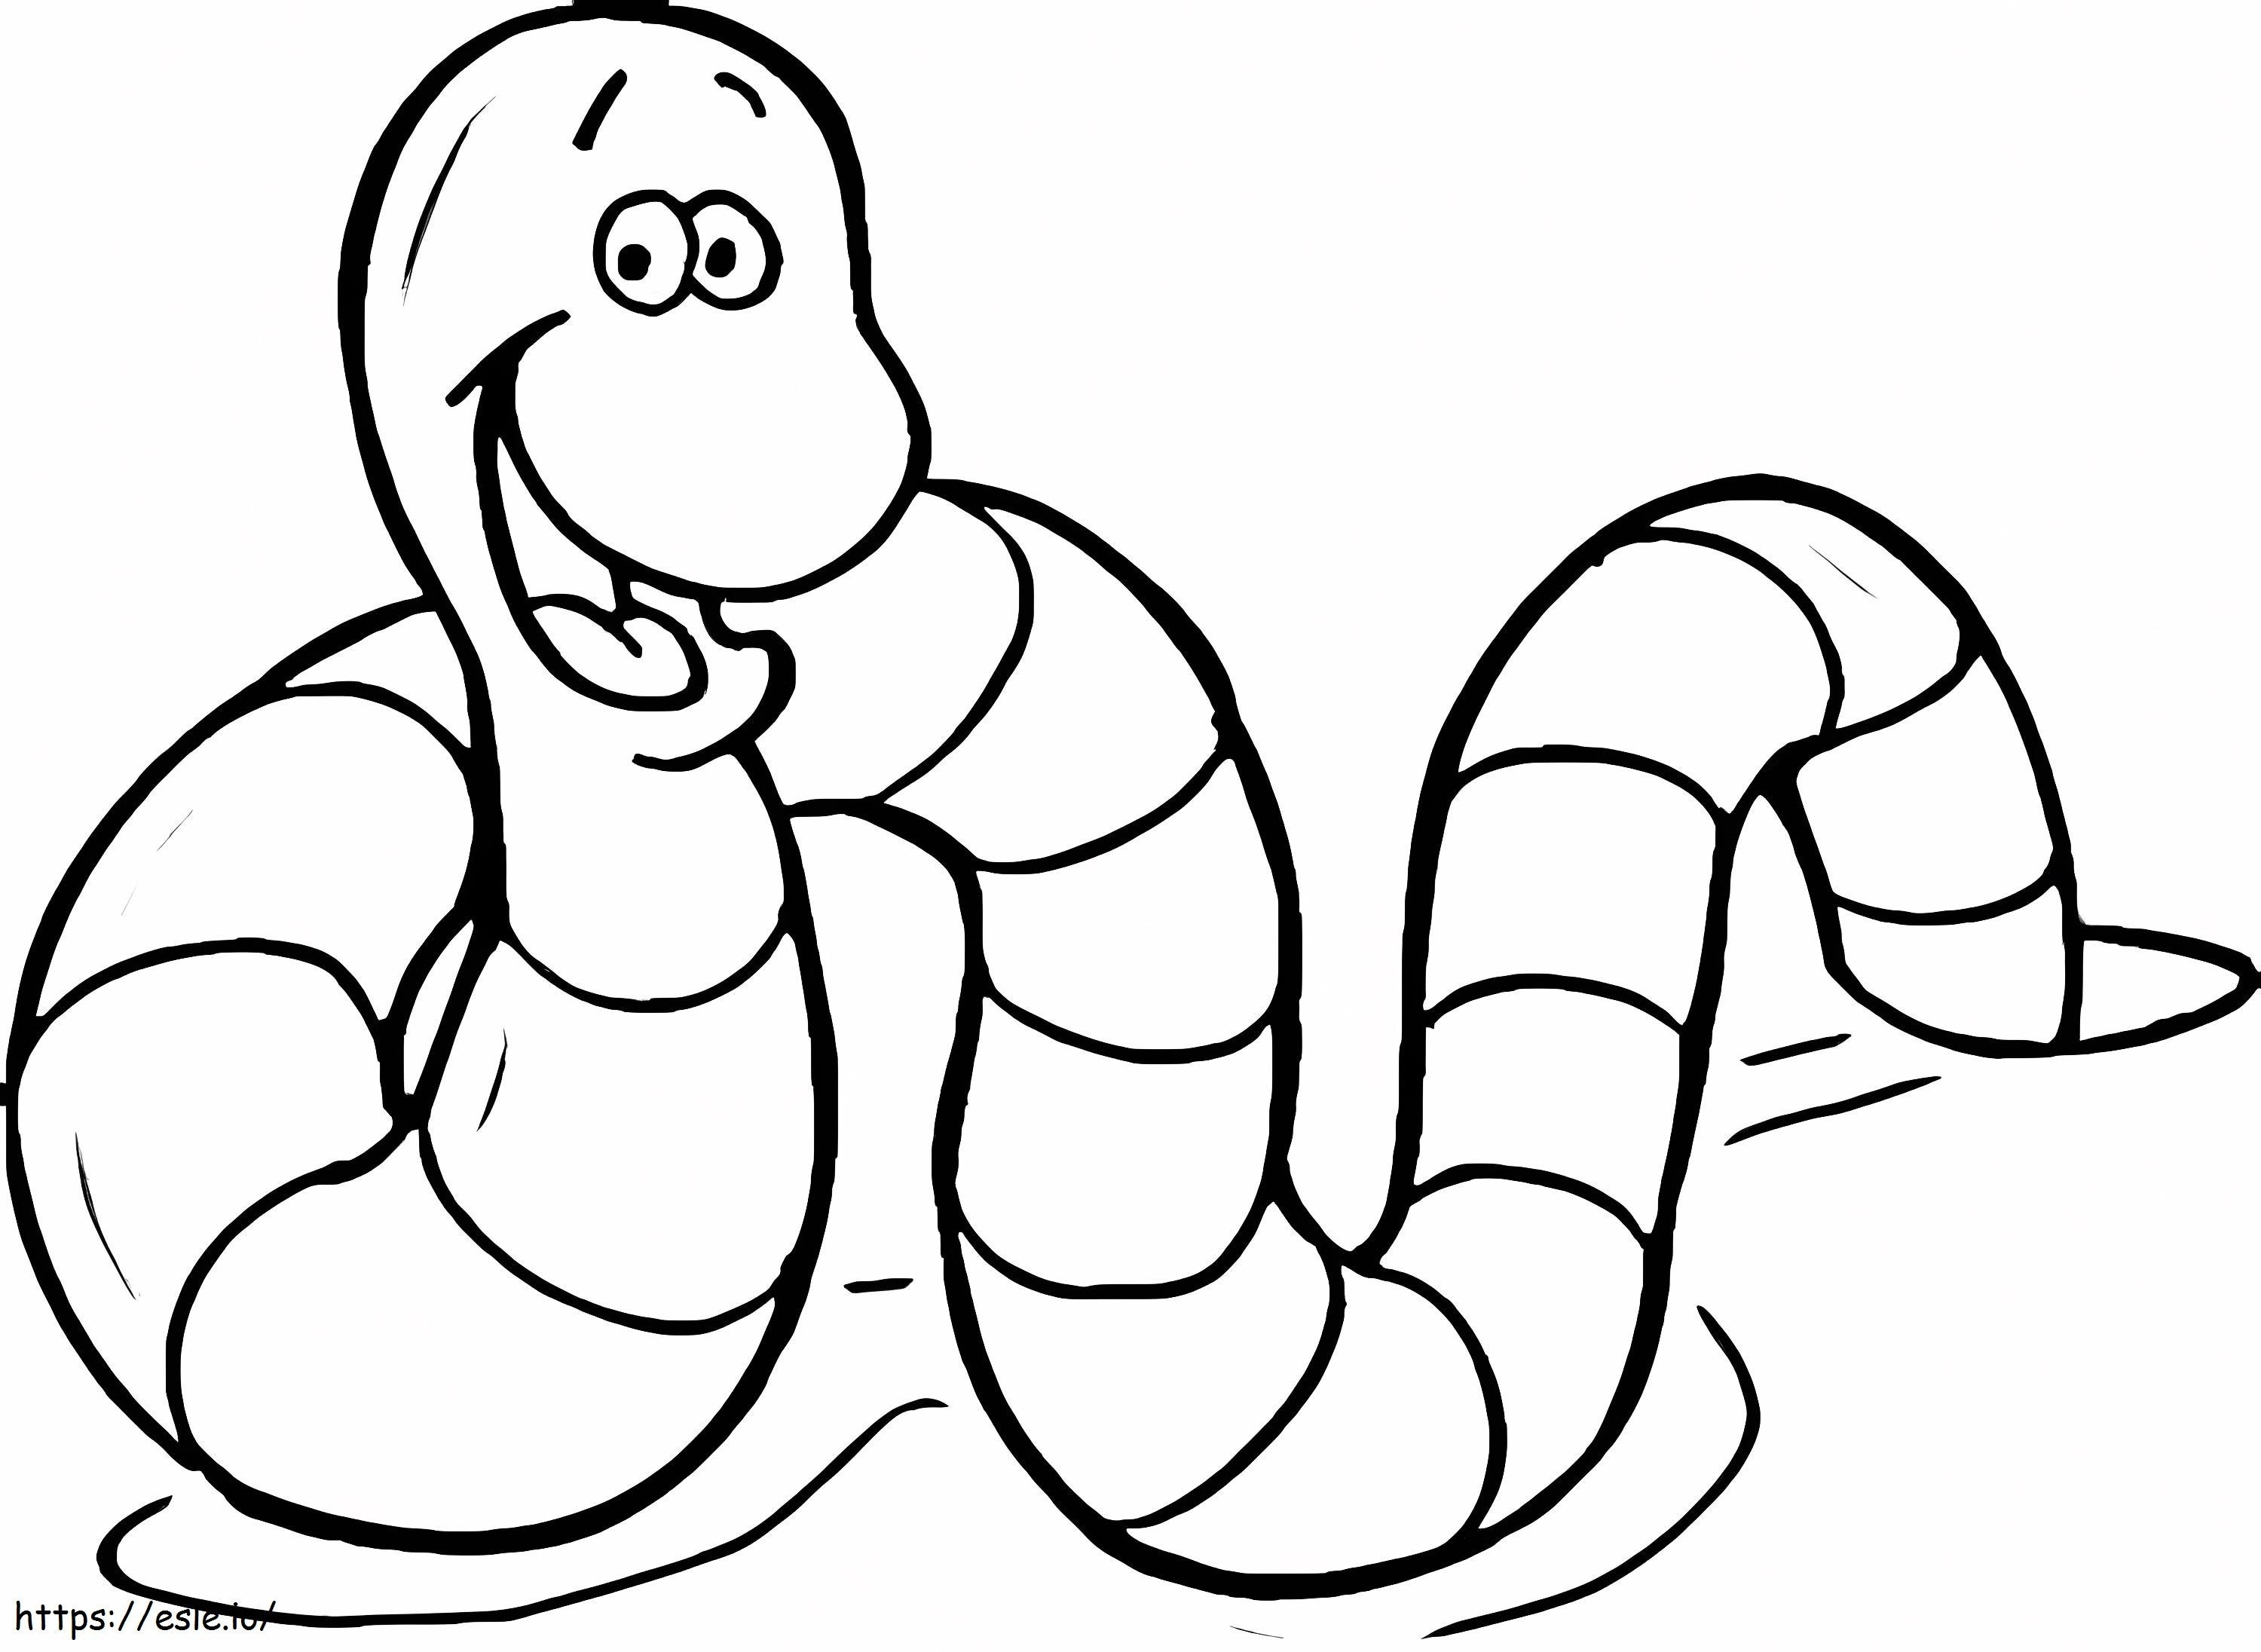 Earthworm Smiling coloring page